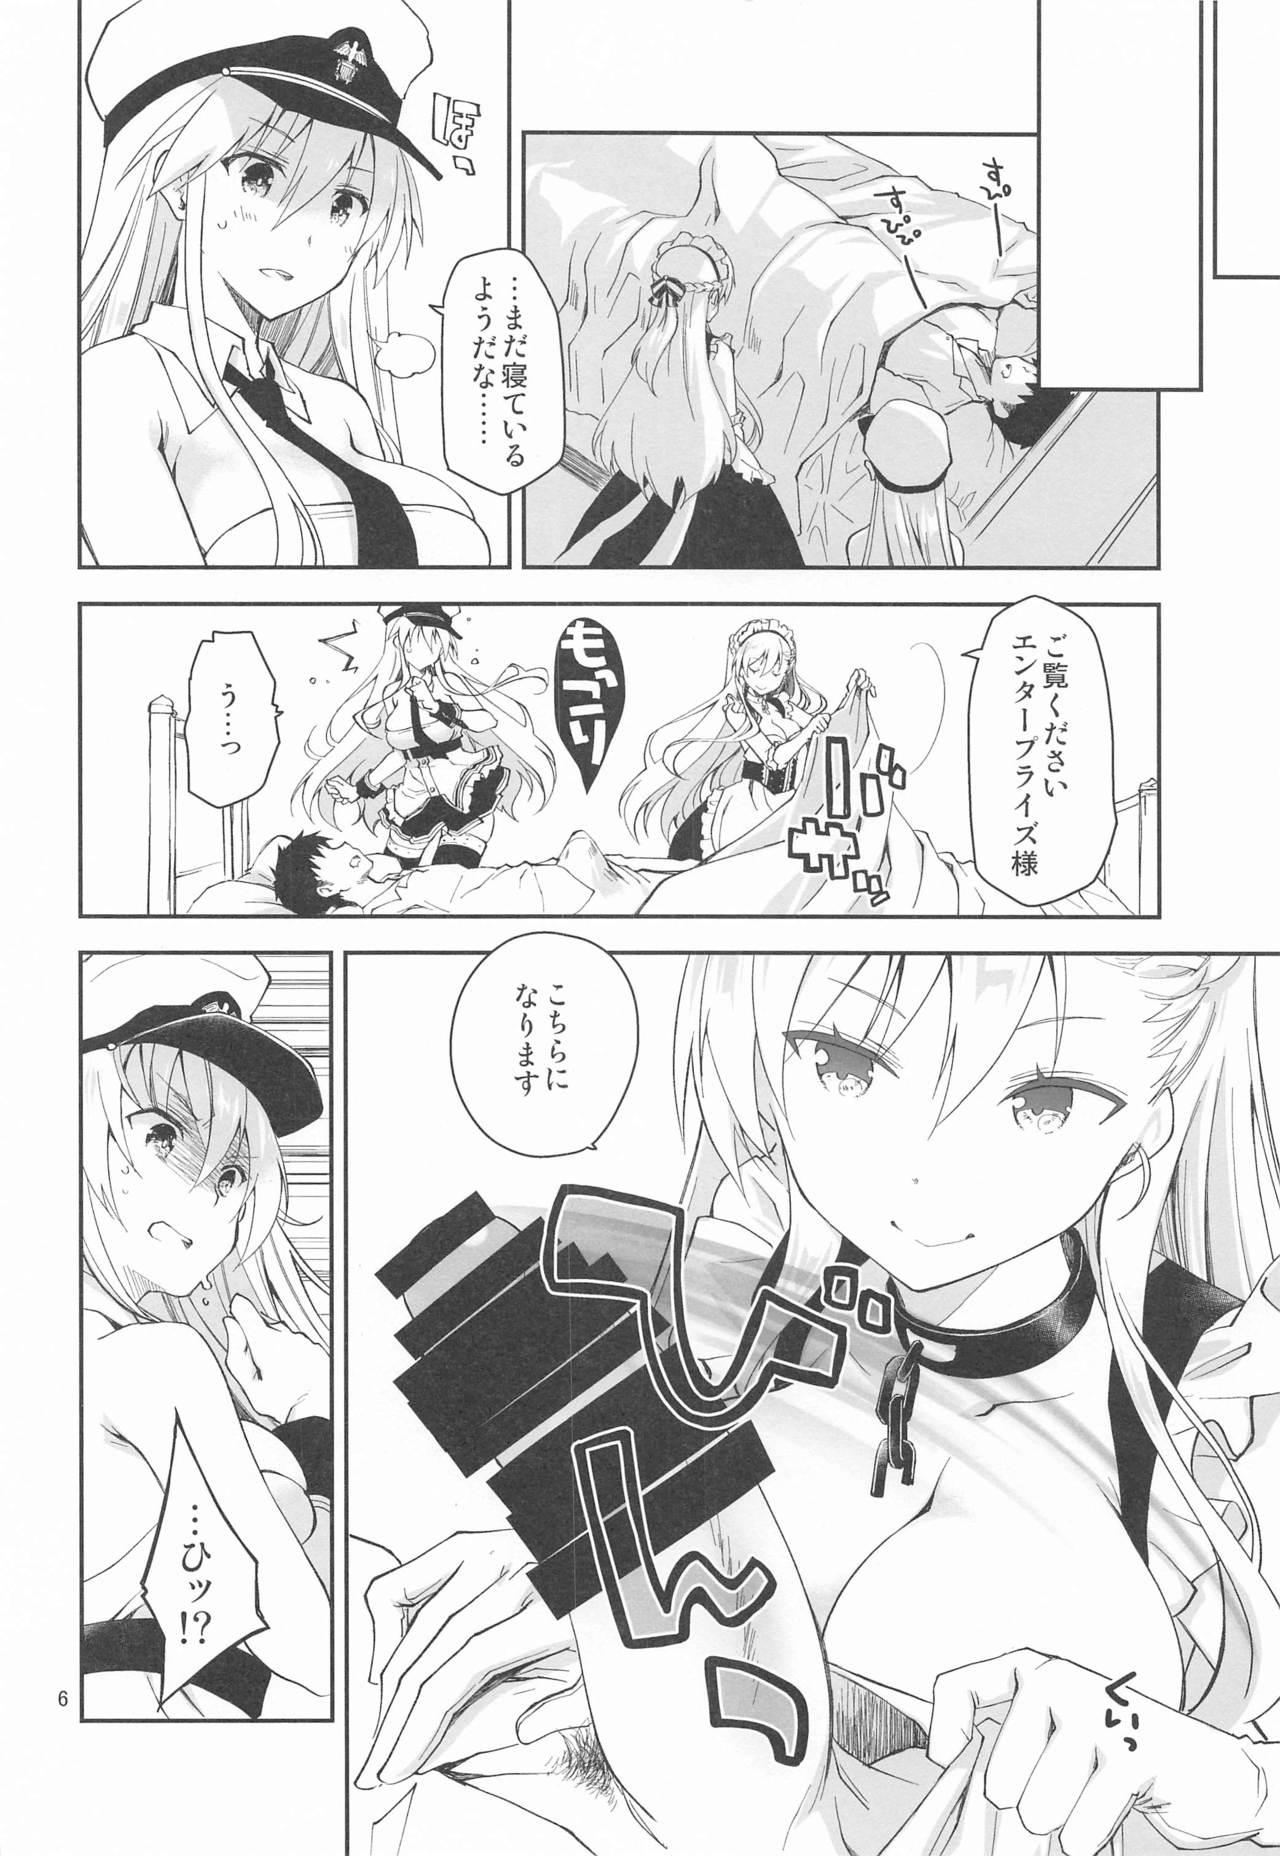 Culo Maid in Enterprise - Azur lane Caught - Page 5